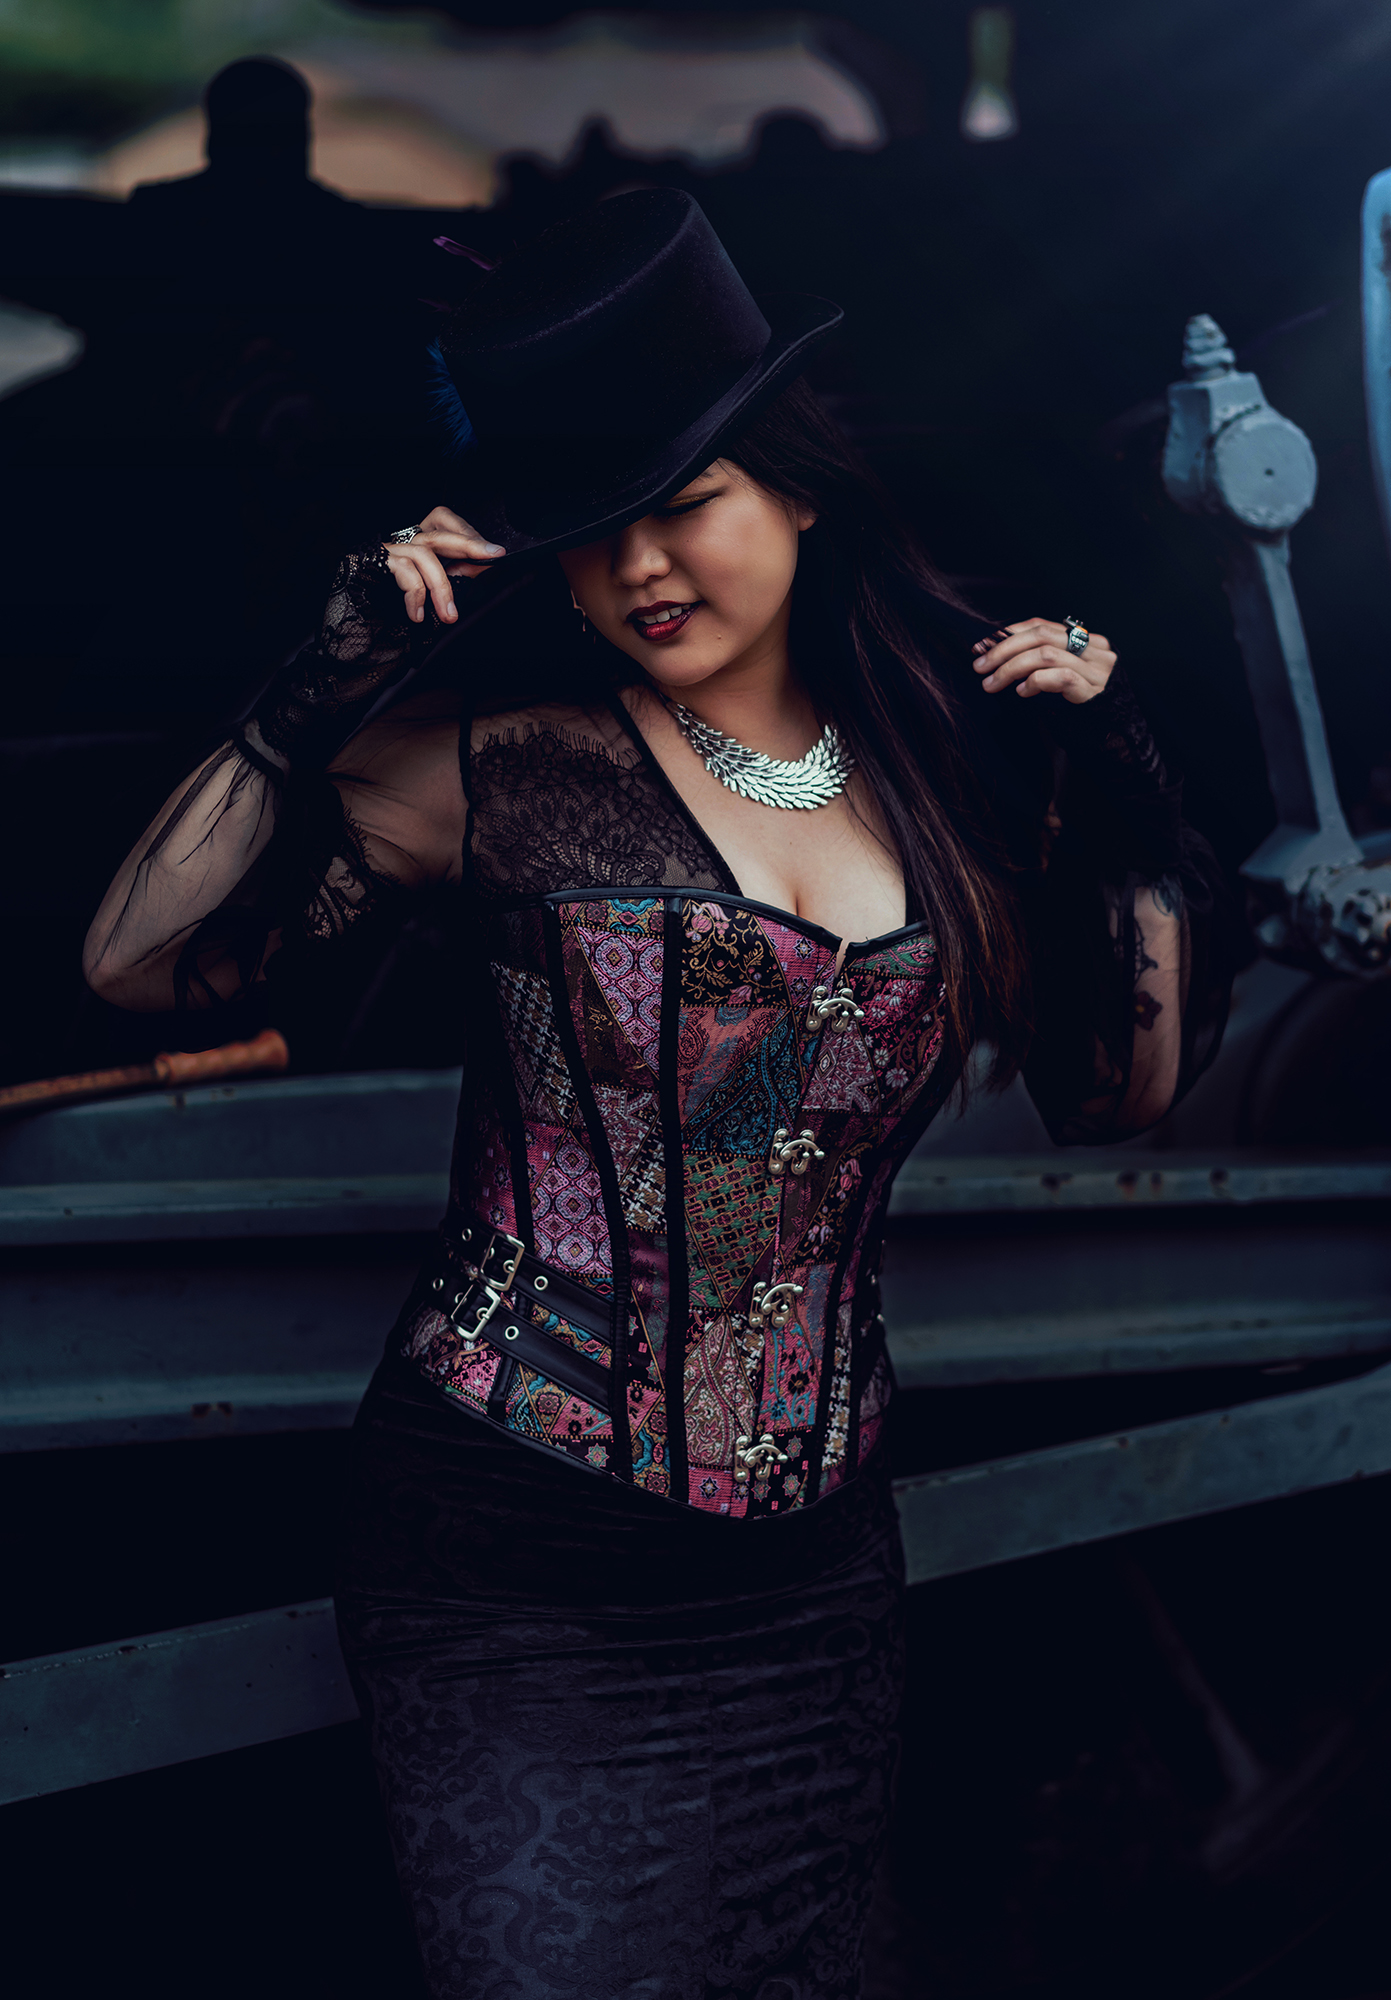 A woman wearing a colorful corset and a top hat for steampunk style fantasy photo.